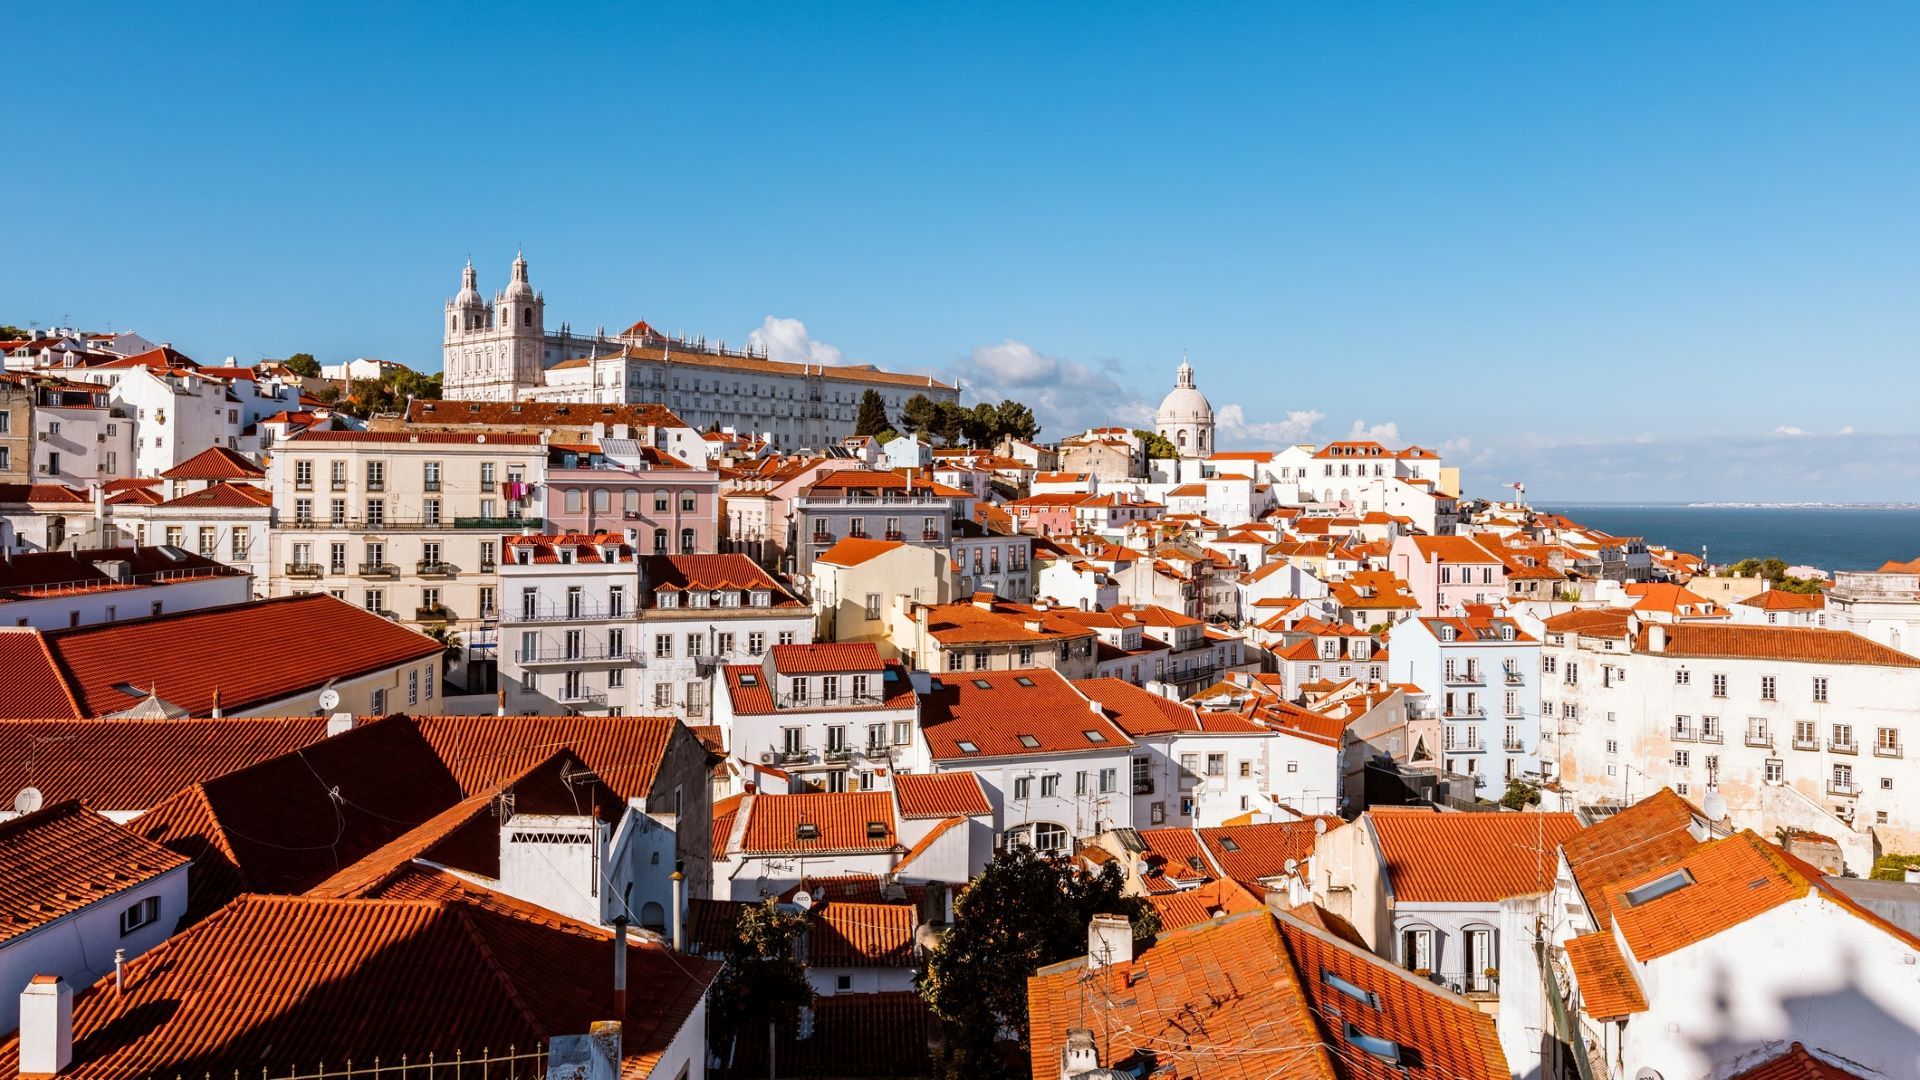 <p>                     If you want to visit Europe for the architecture, but want to get some sun in too, then Lisbon might be the city for you and your pet. The people of Lisbon love dogs, so you can guarantee your furry friend will get lots of pets as you explore the pastel-colored buildings and historic castle.                   </p>